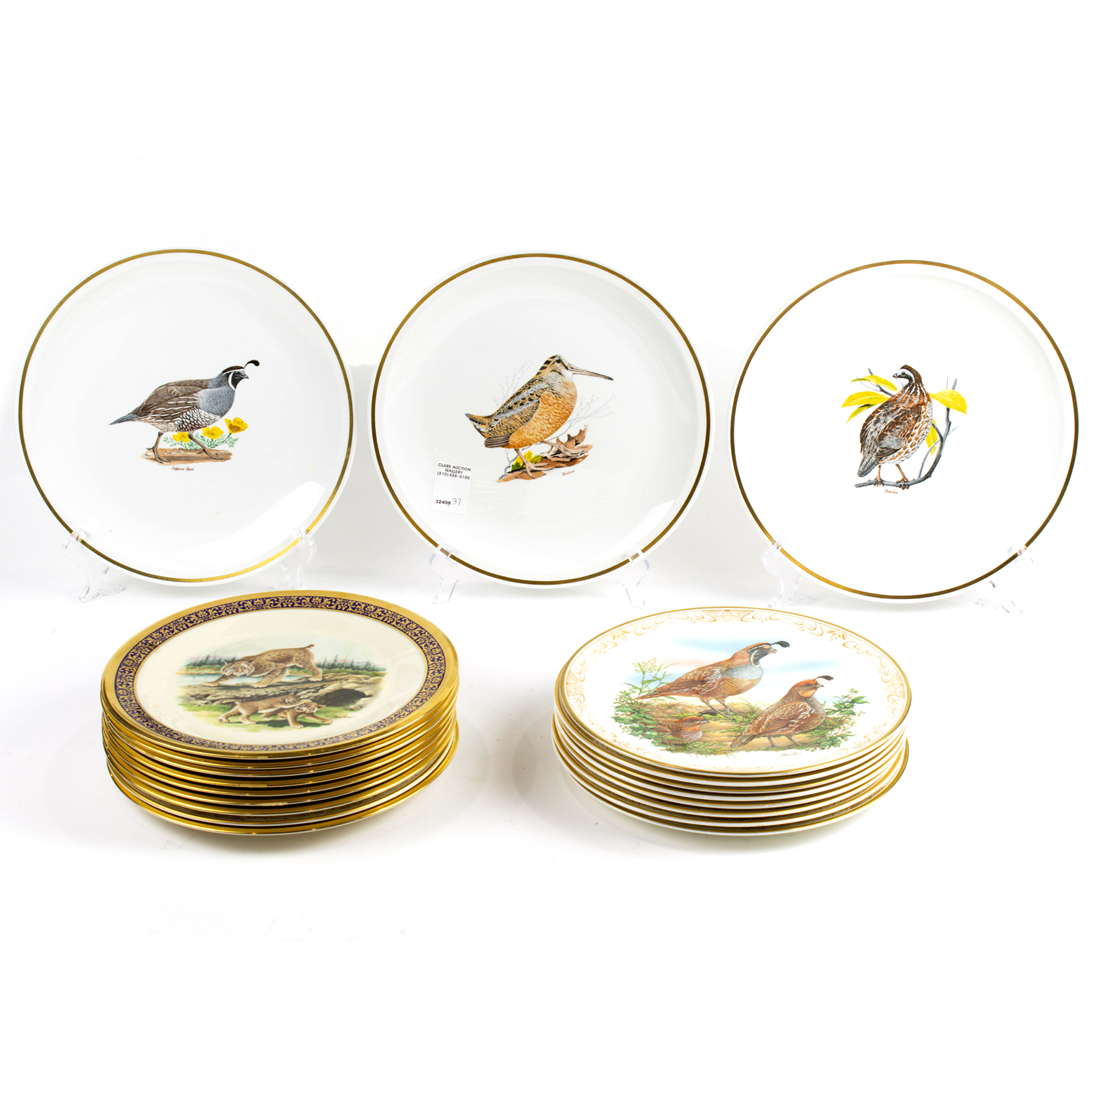 LARGE GROUPING OF EARTHENWARE BIRD